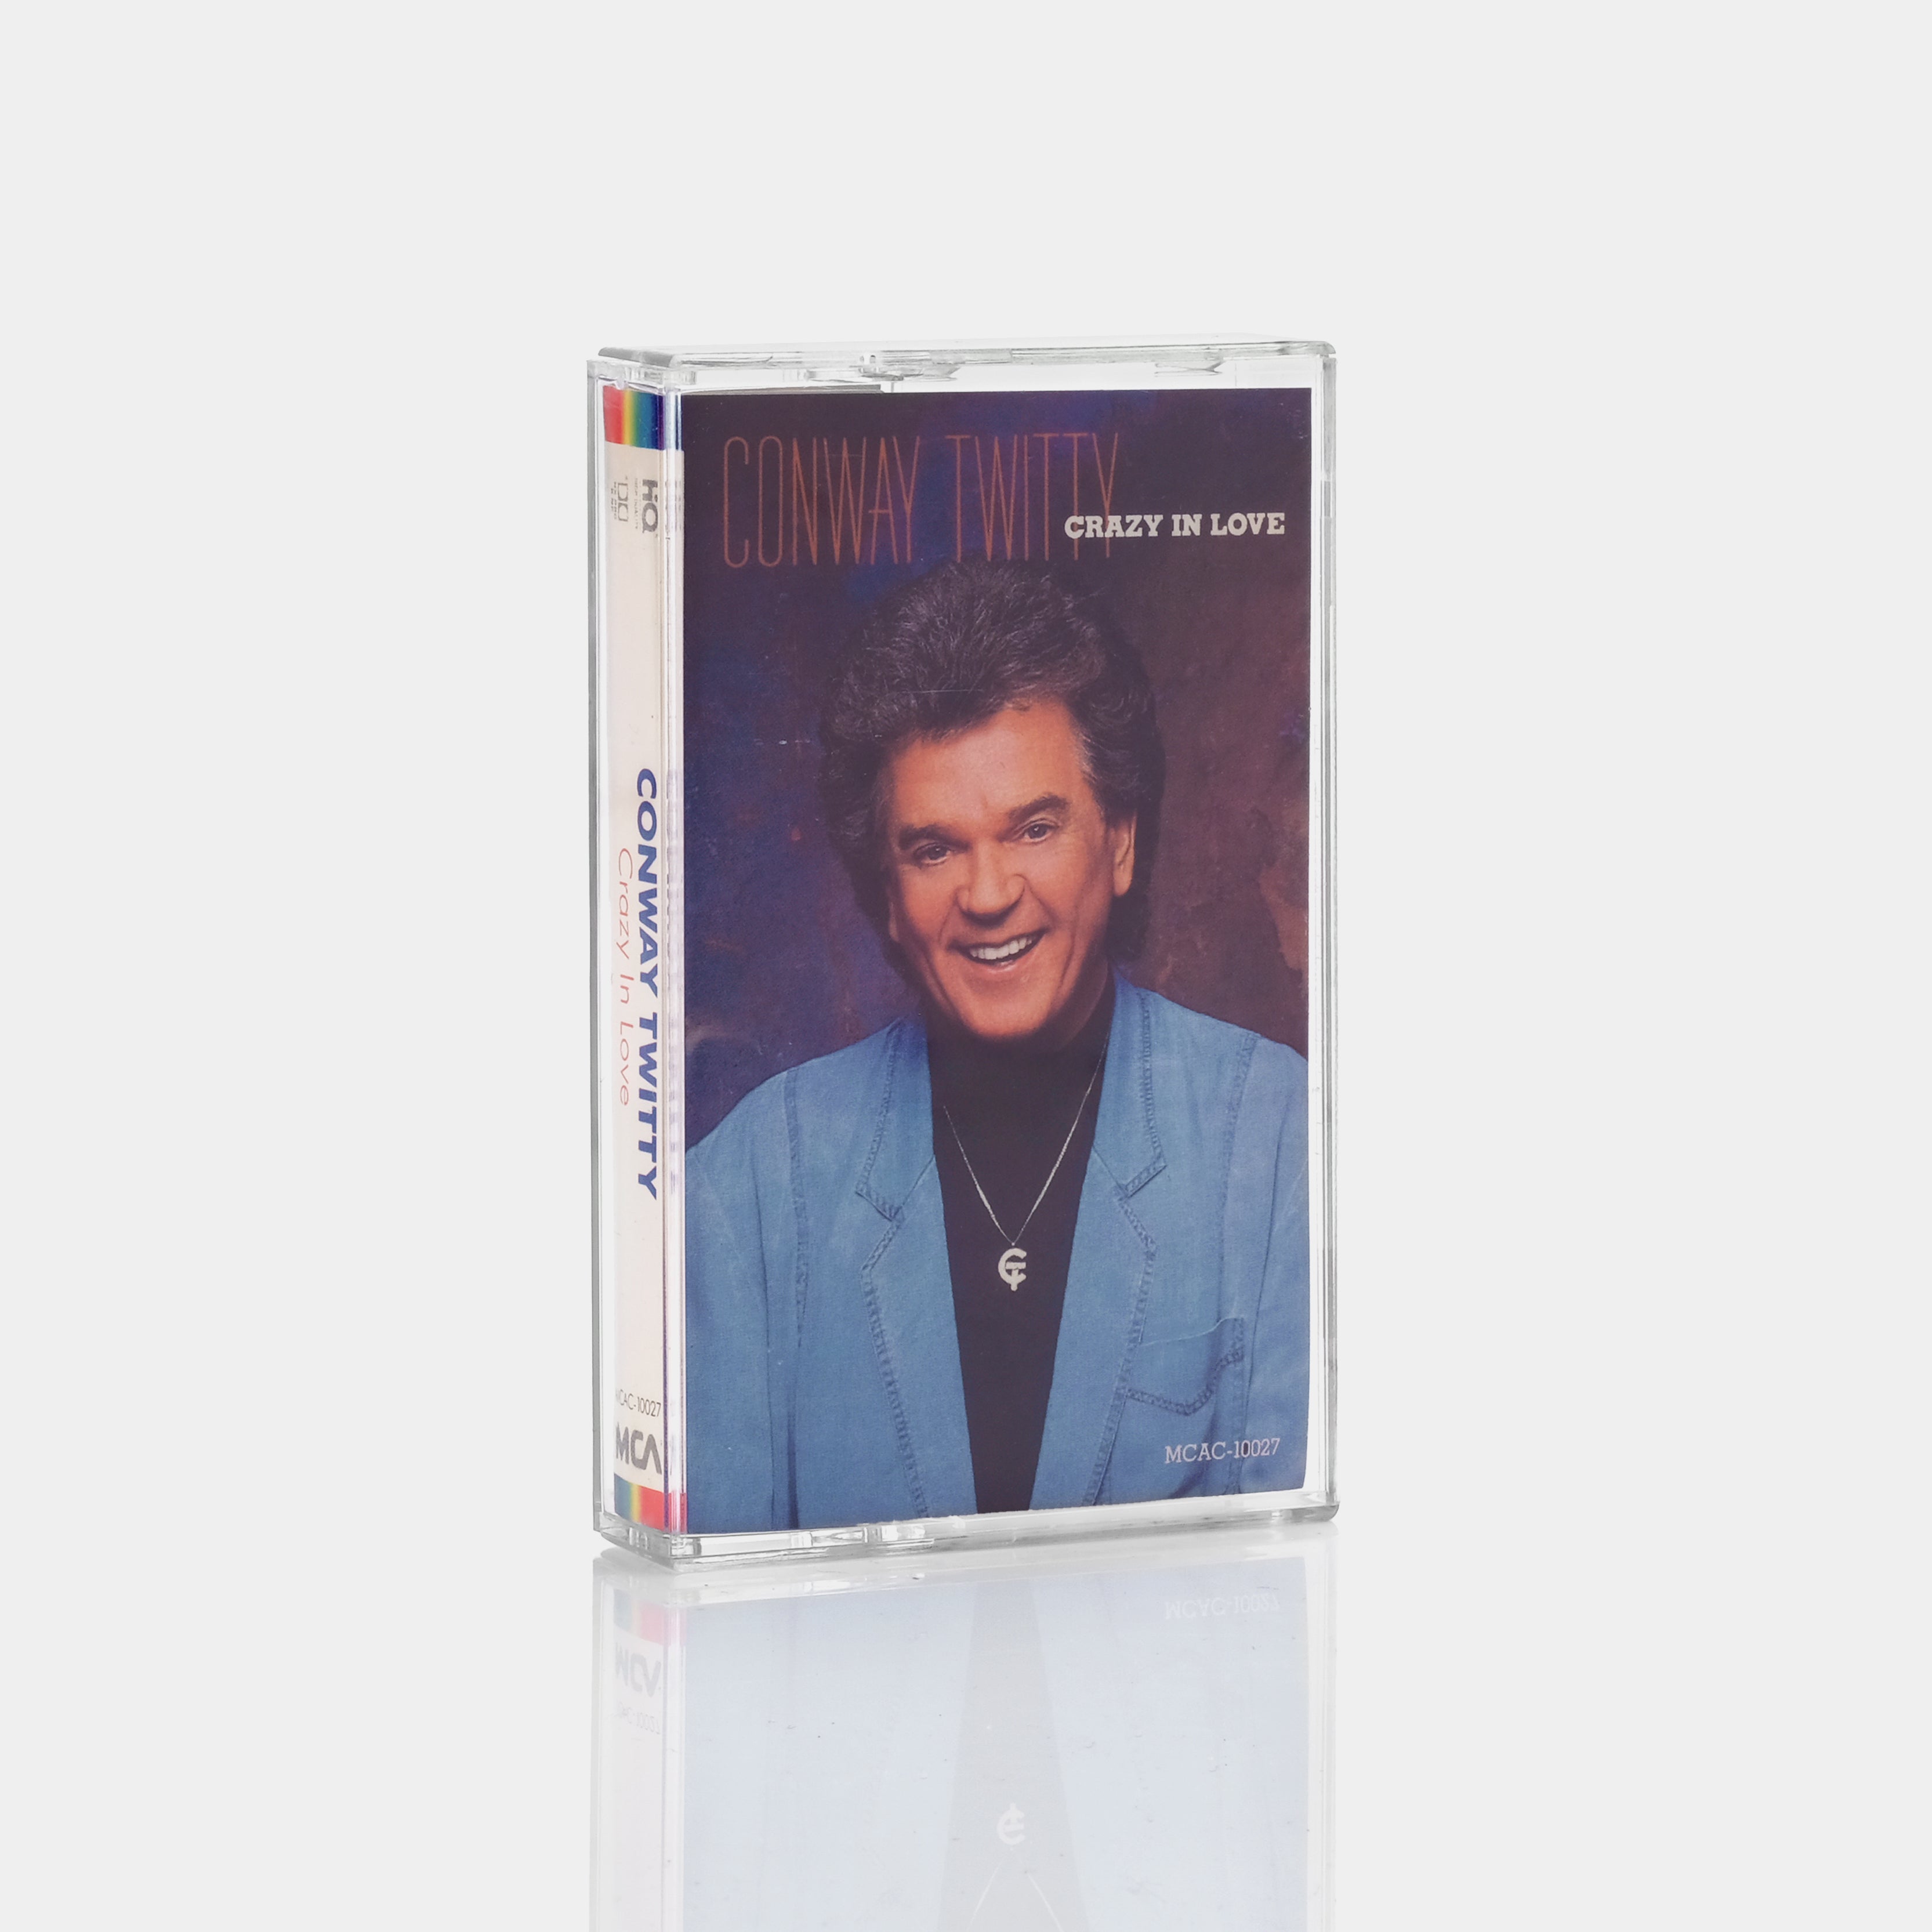 Conway Twitty - Crazy In Love Cassette Tape